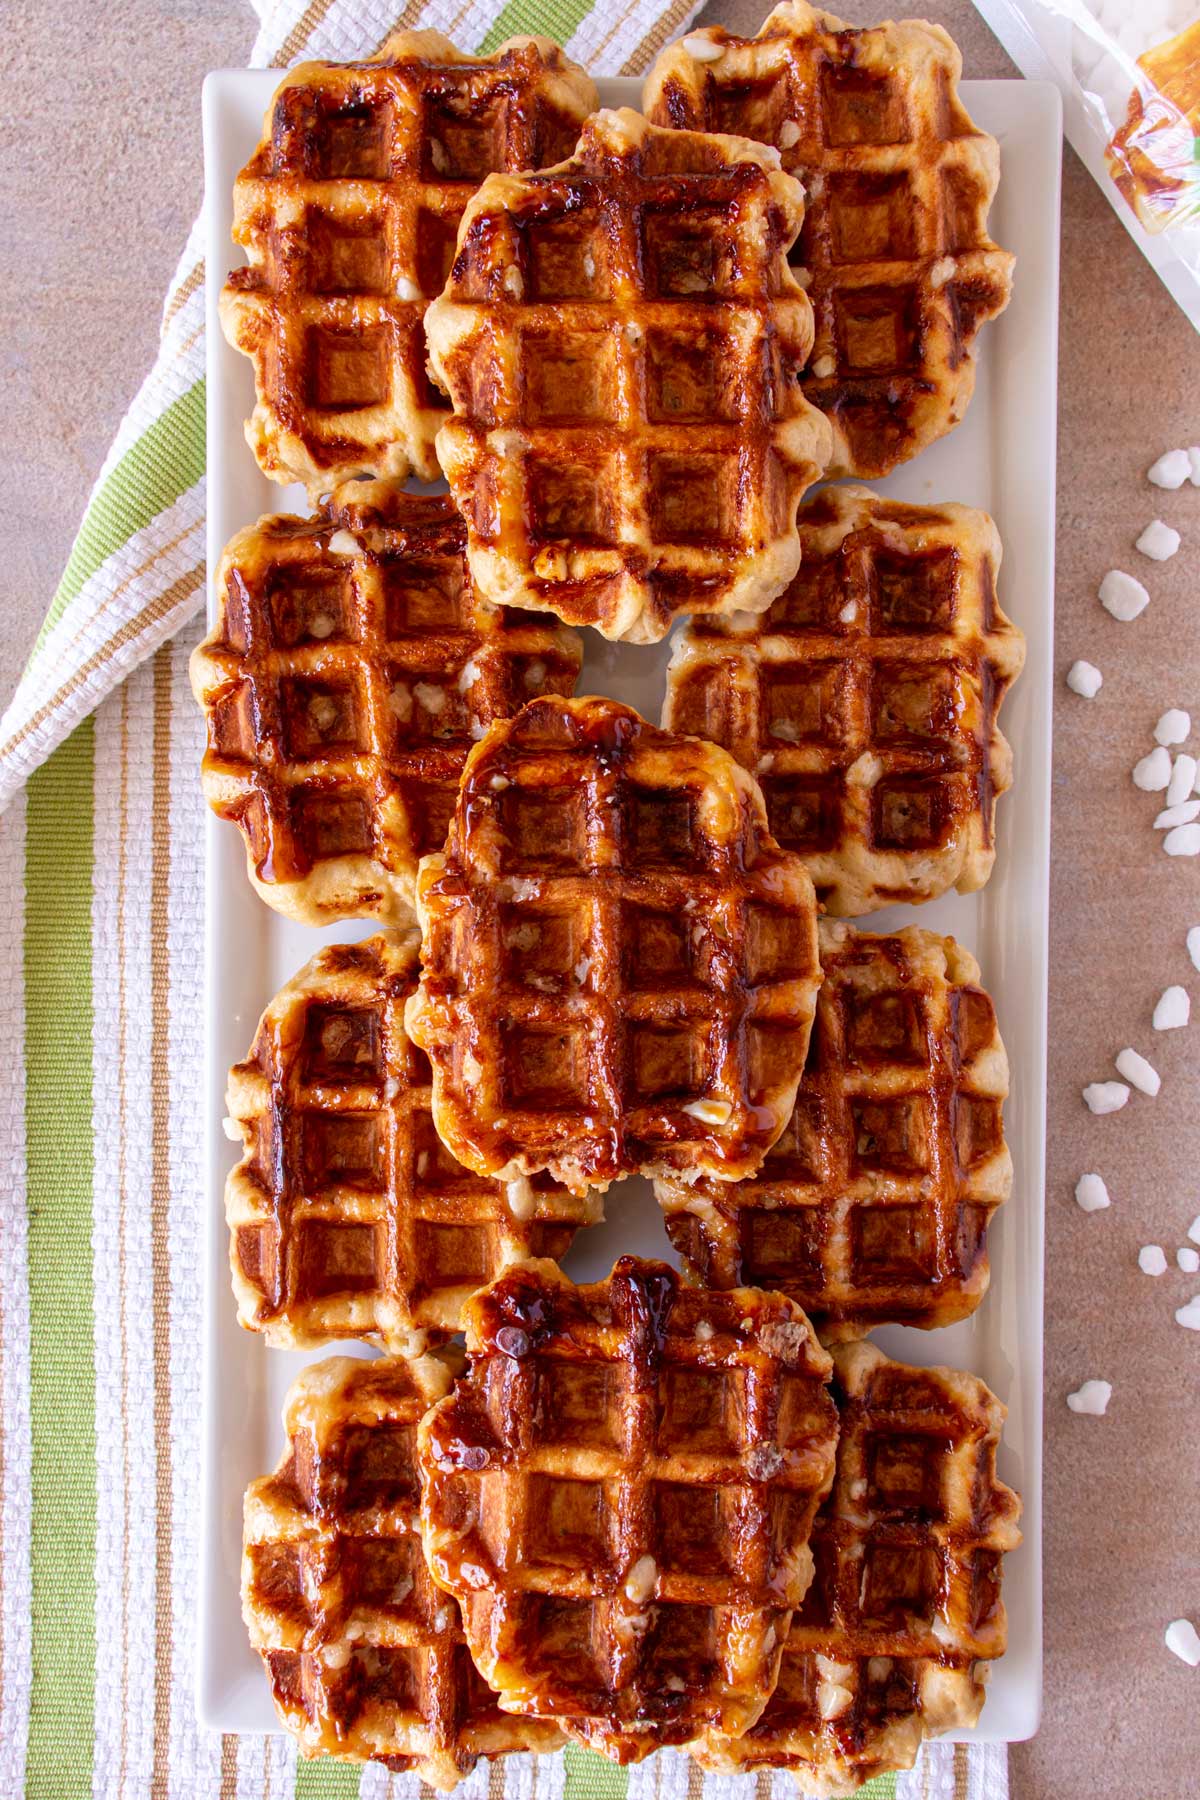 Eleven waffles stacked in rows on a white rectangular platter on top of a striped towel.